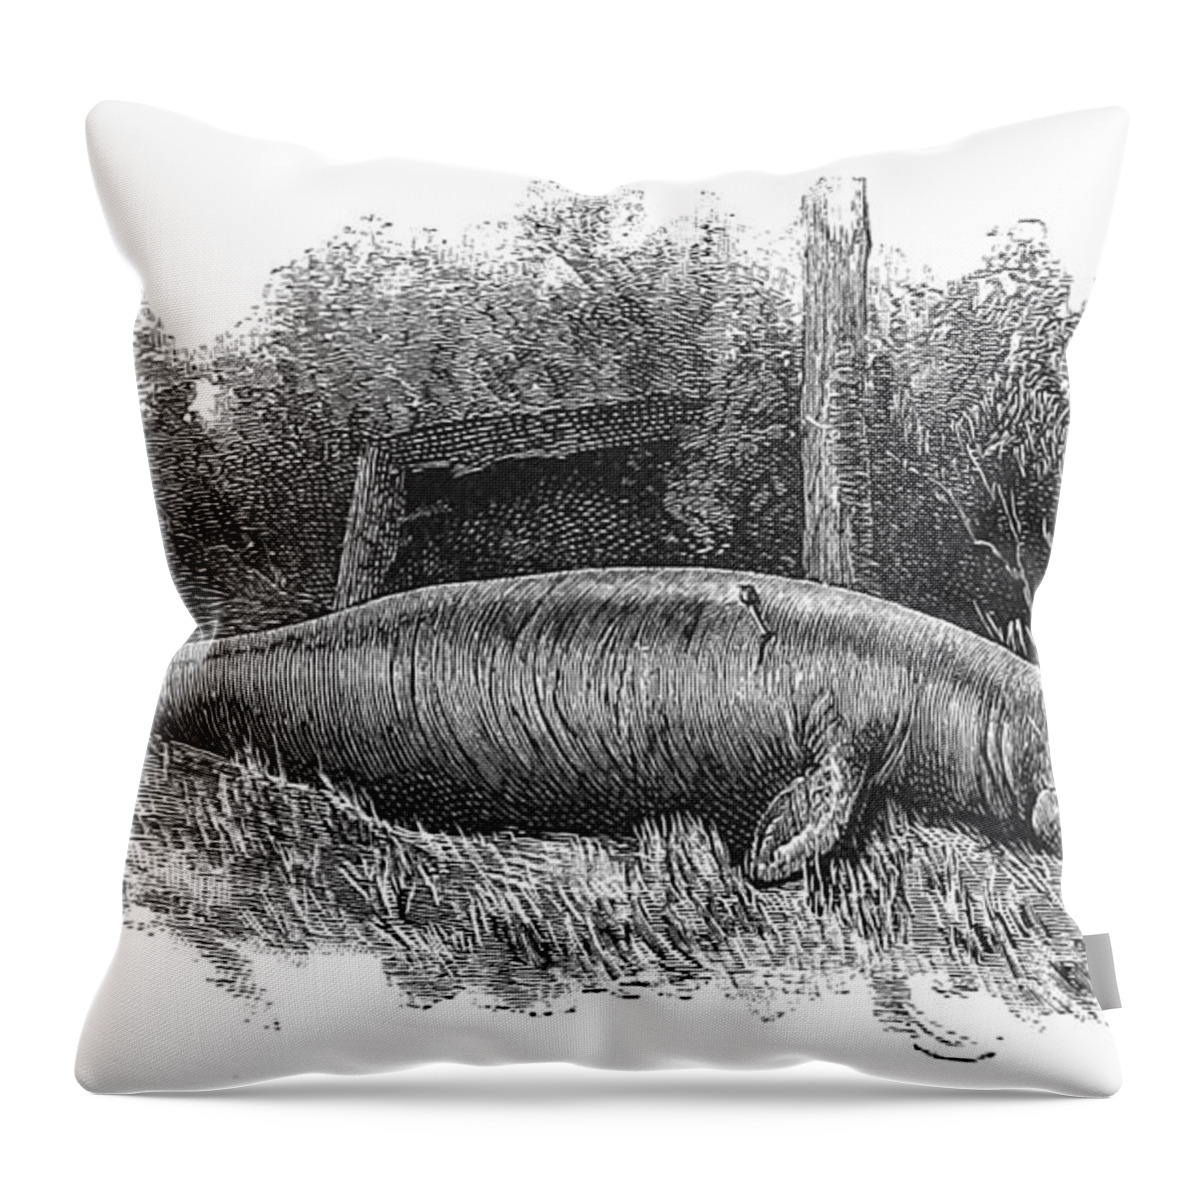 Illustration Throw Pillow featuring the photograph Dugong, Sea-cow by British Library